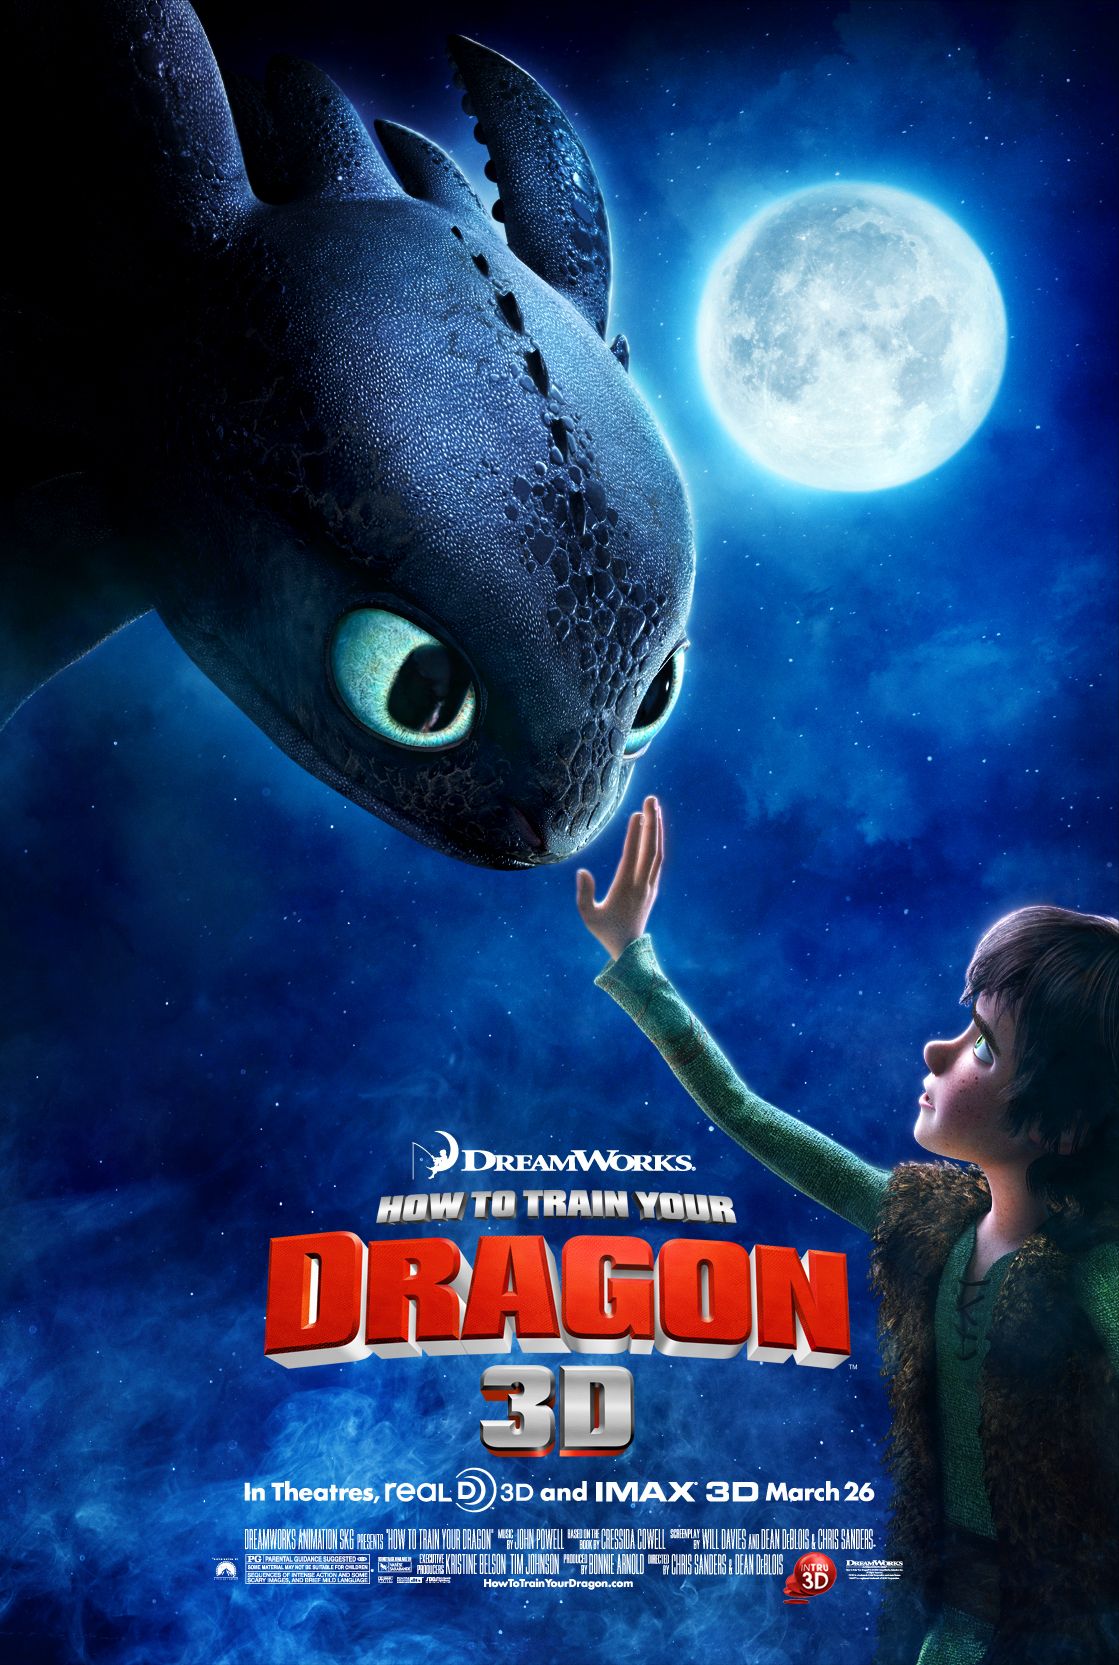 How to Train Your Dragon Film Poster